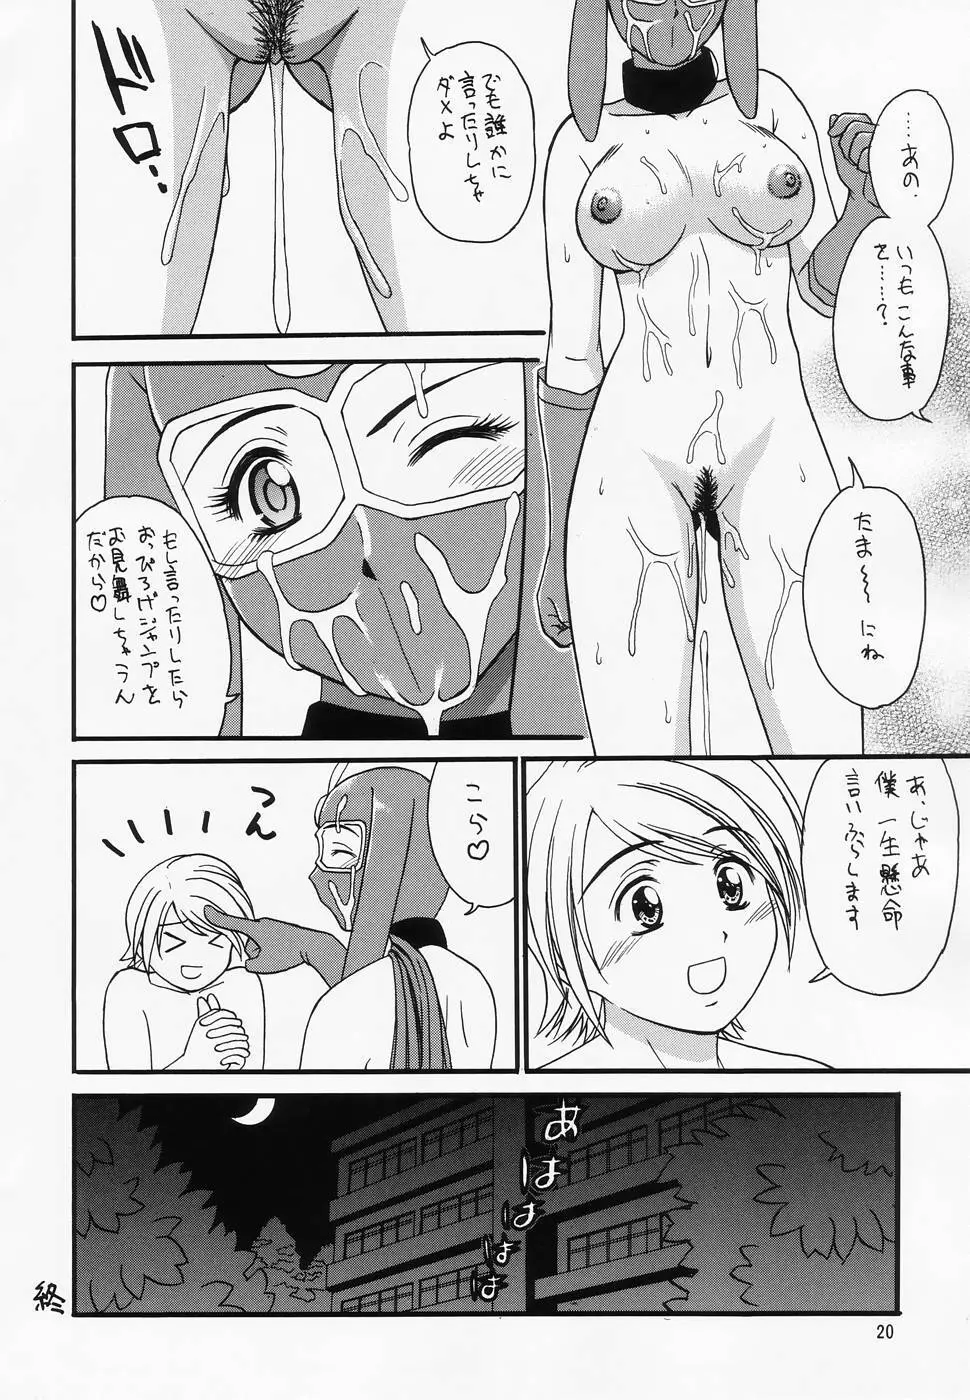 ToWeR's WoRkS A-style - page20